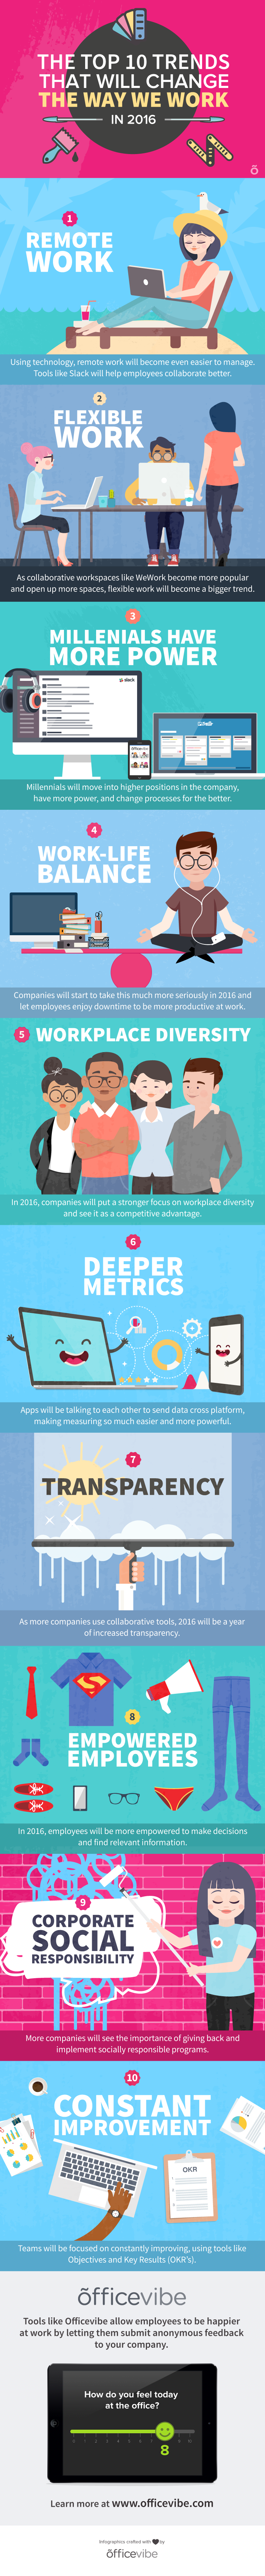 infographic-top-trends-2016